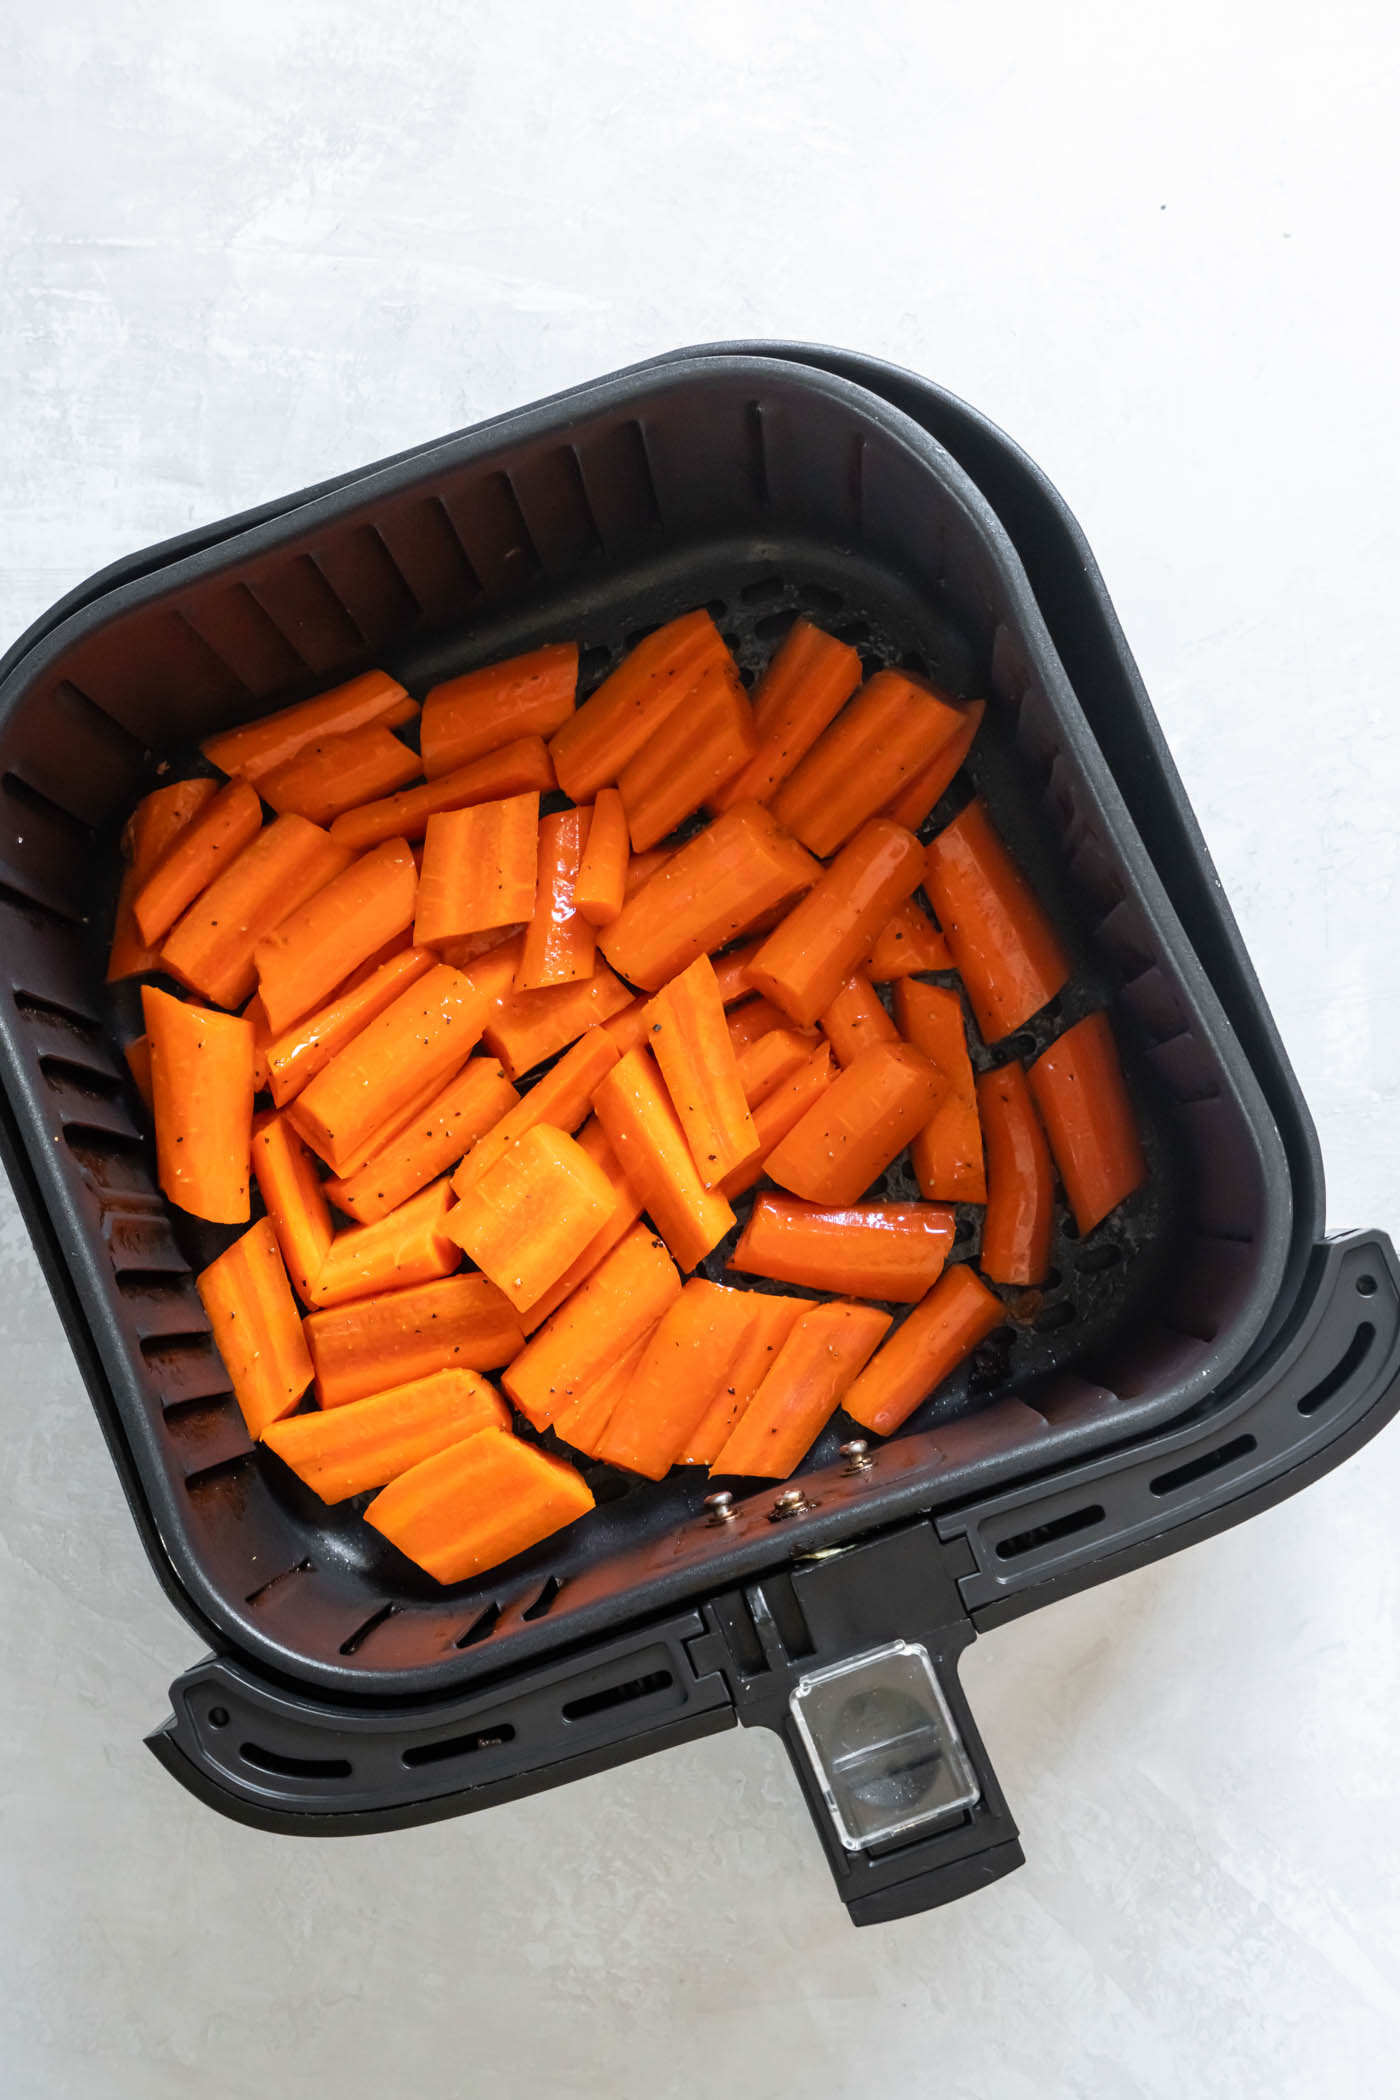 Uncooked chopped carrots in air fryer.